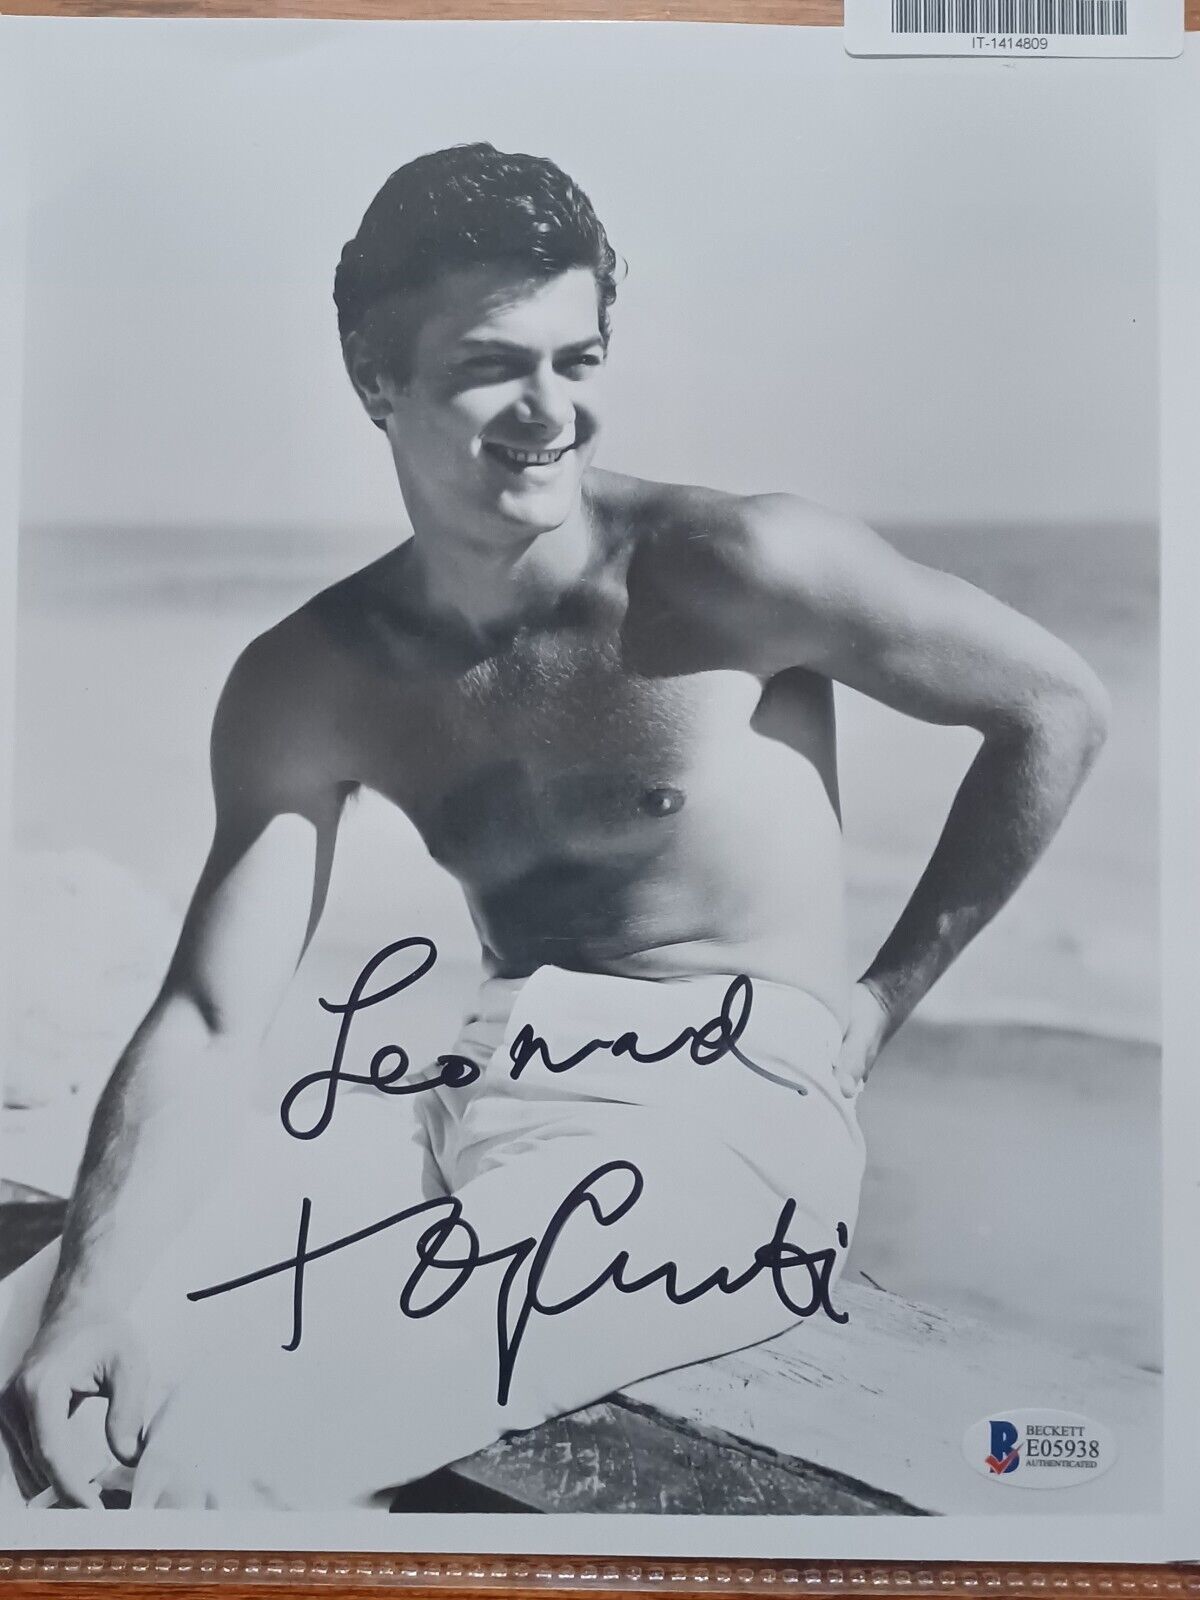 Primary image for TONY CURTIS HAND SIGNED 8x10 PHOTO AUTOGRAPHED BECKETT COA